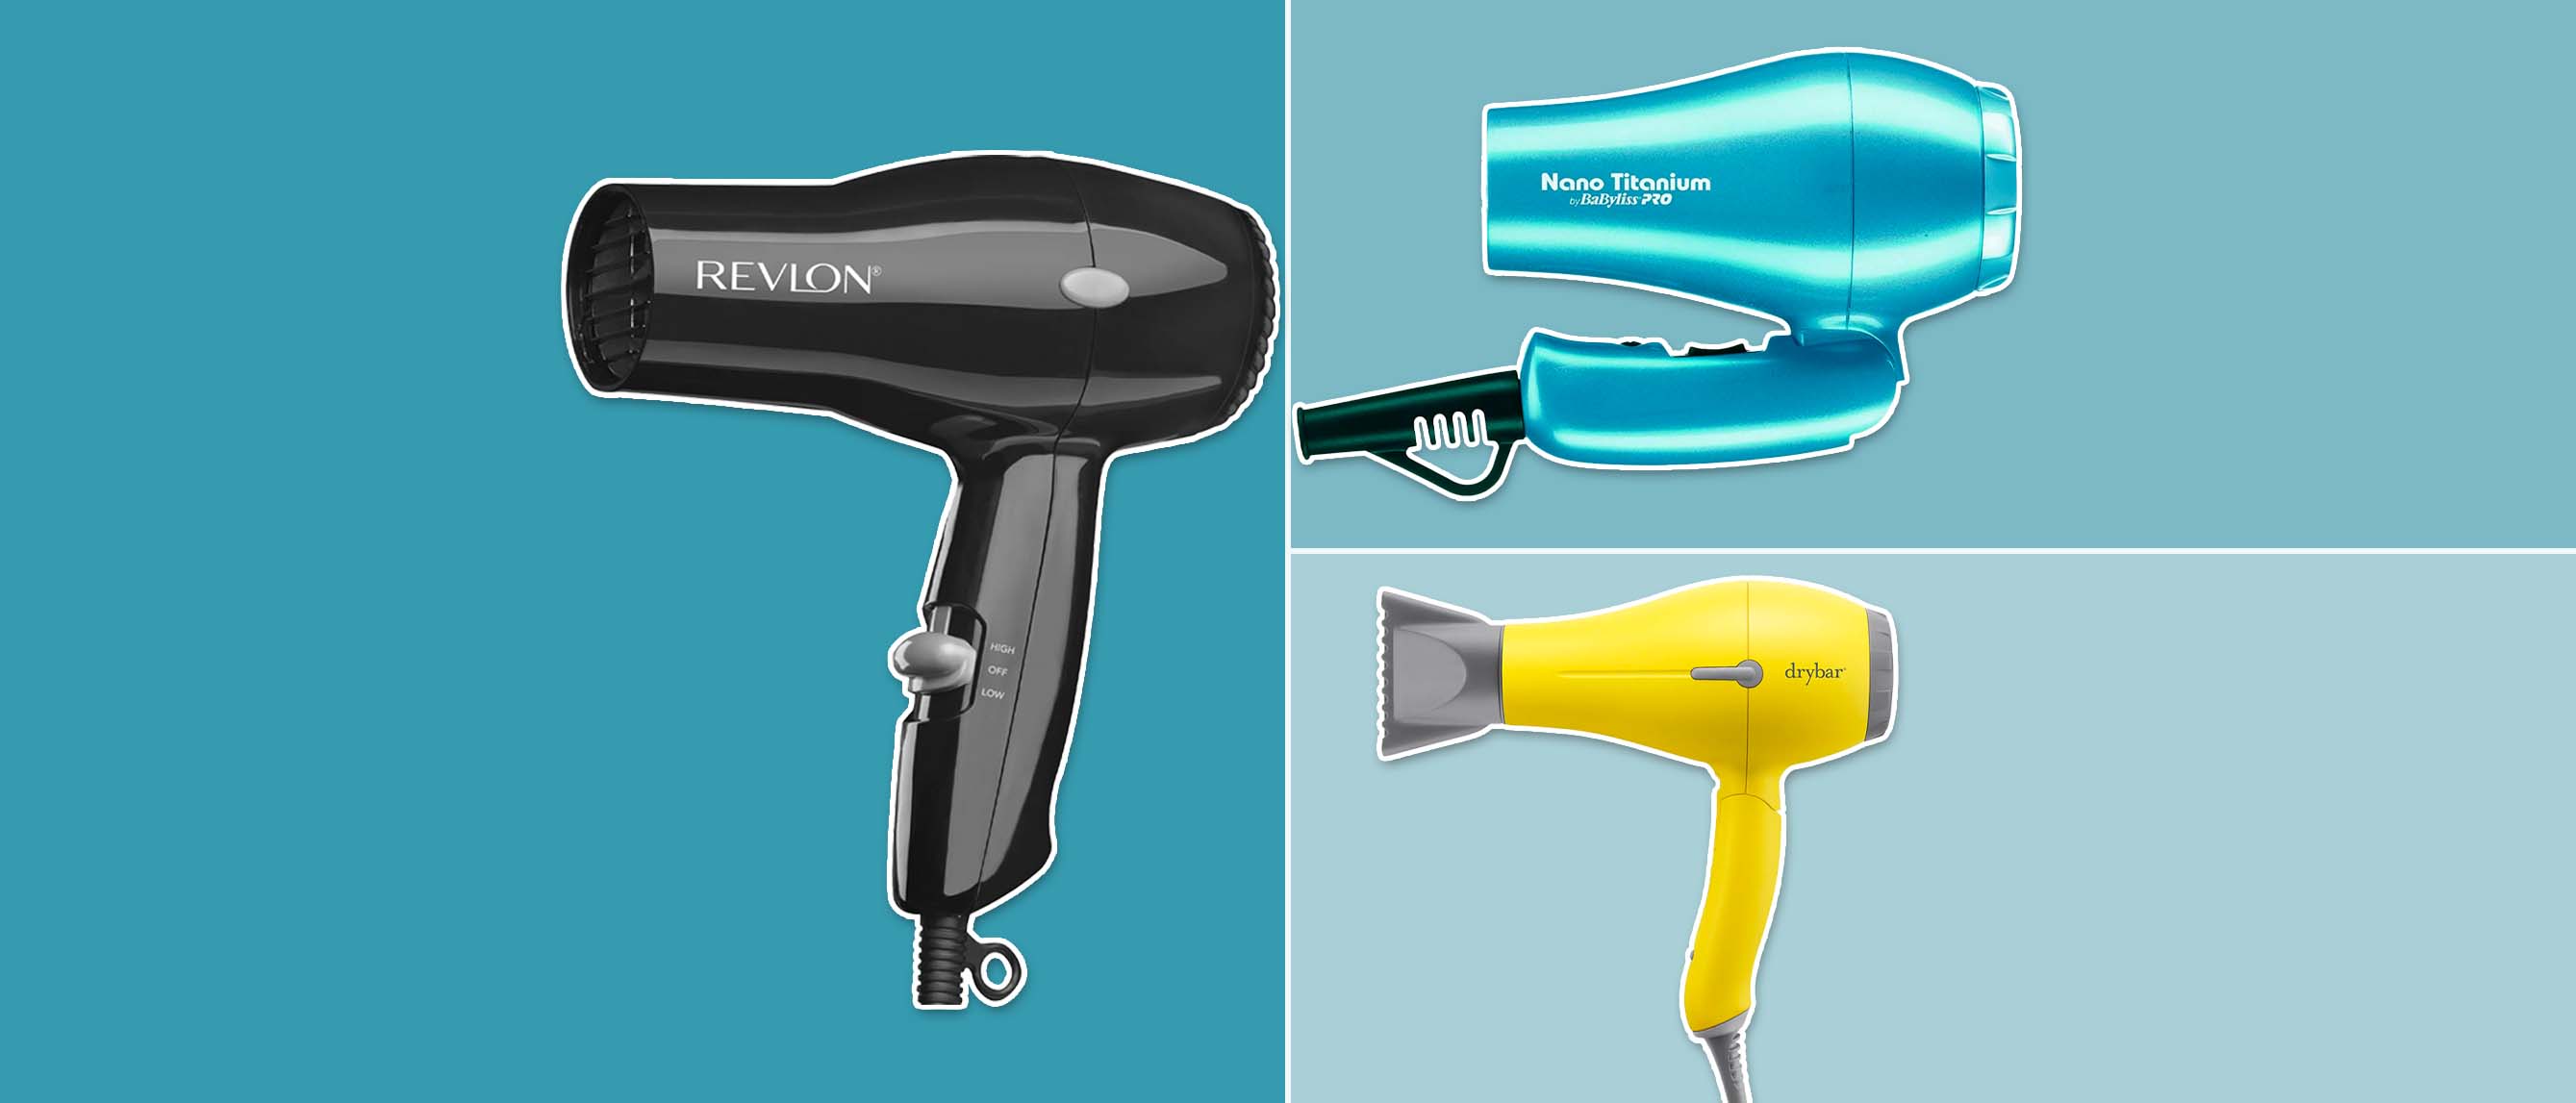 travel hair dryers from revlon, babyliss and more